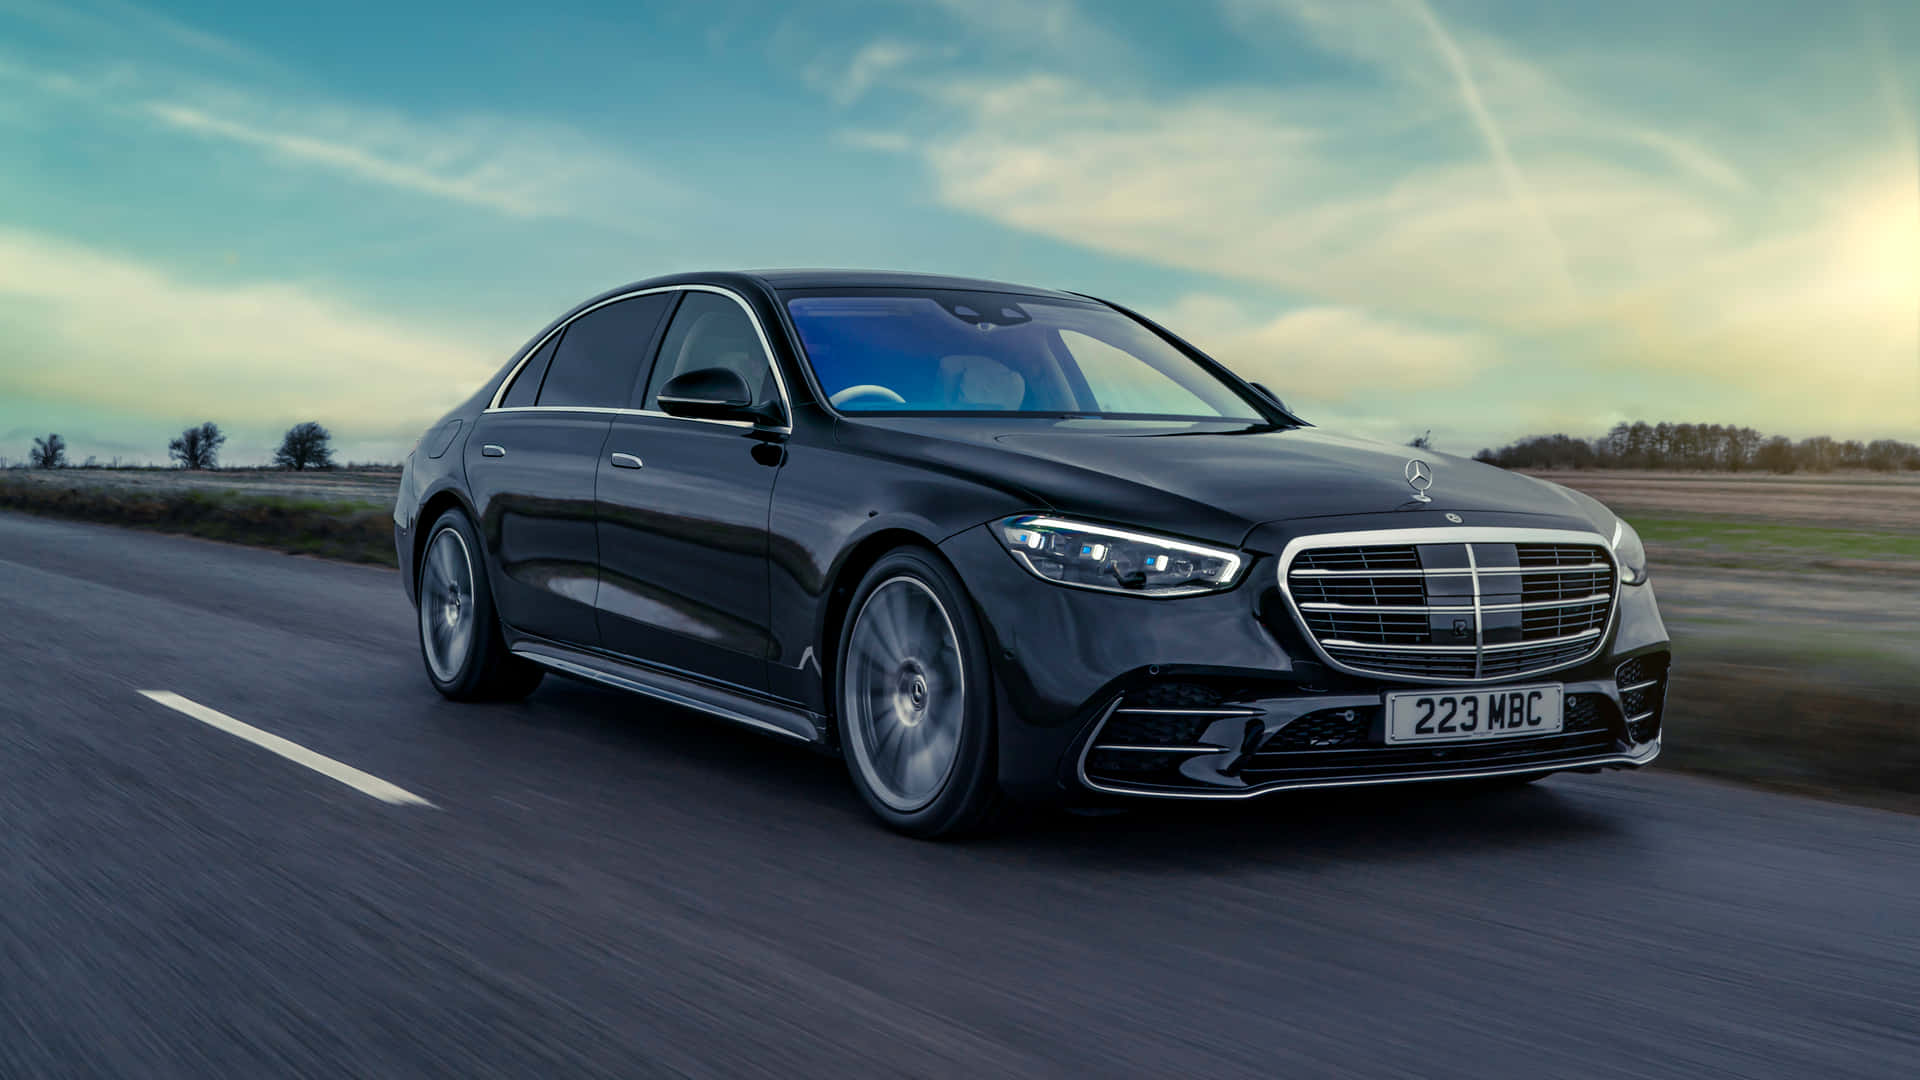 The Mercedes S Class Is Driving Down The Road Wallpaper